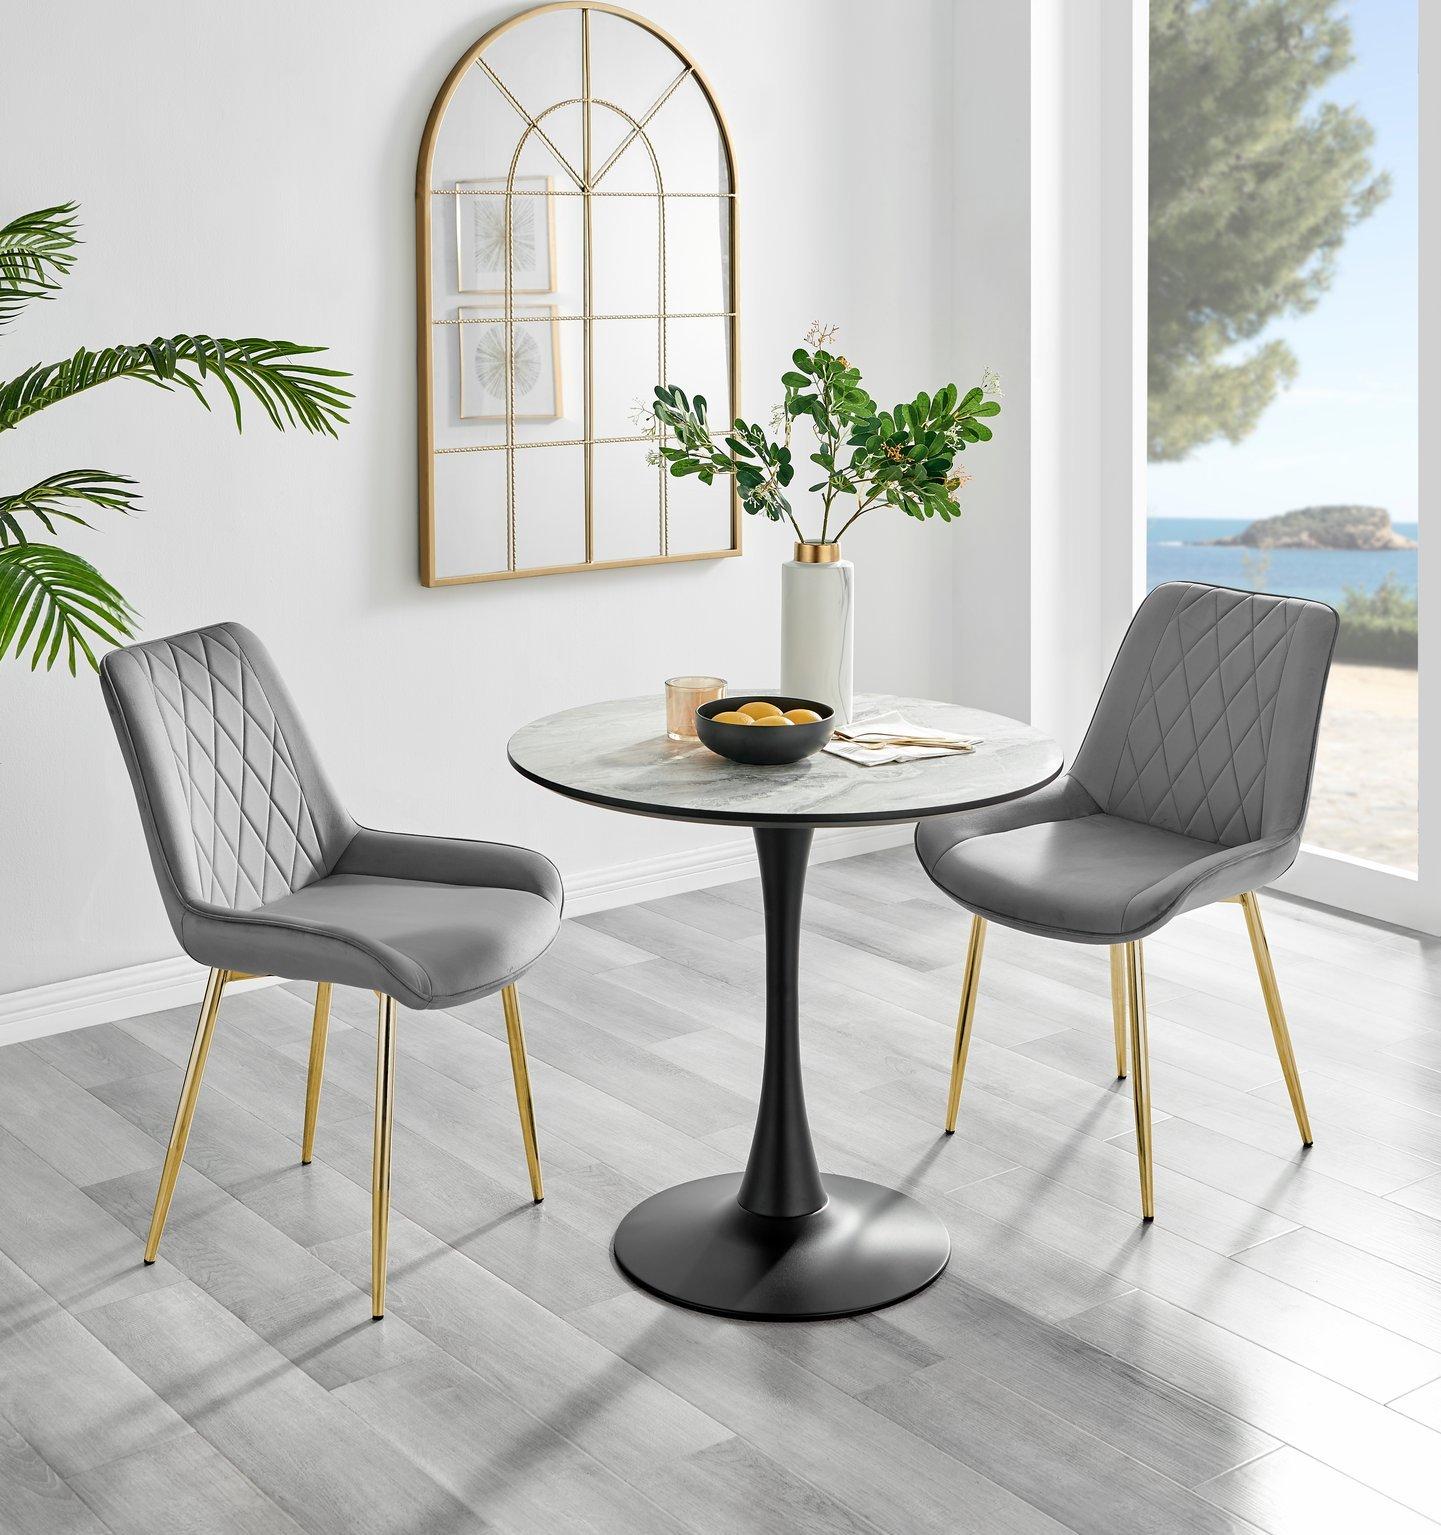 Elina White Marble Effect Scratch Resistant Dining Table & 2 Pesaro Gold Leg Velvet Chairs